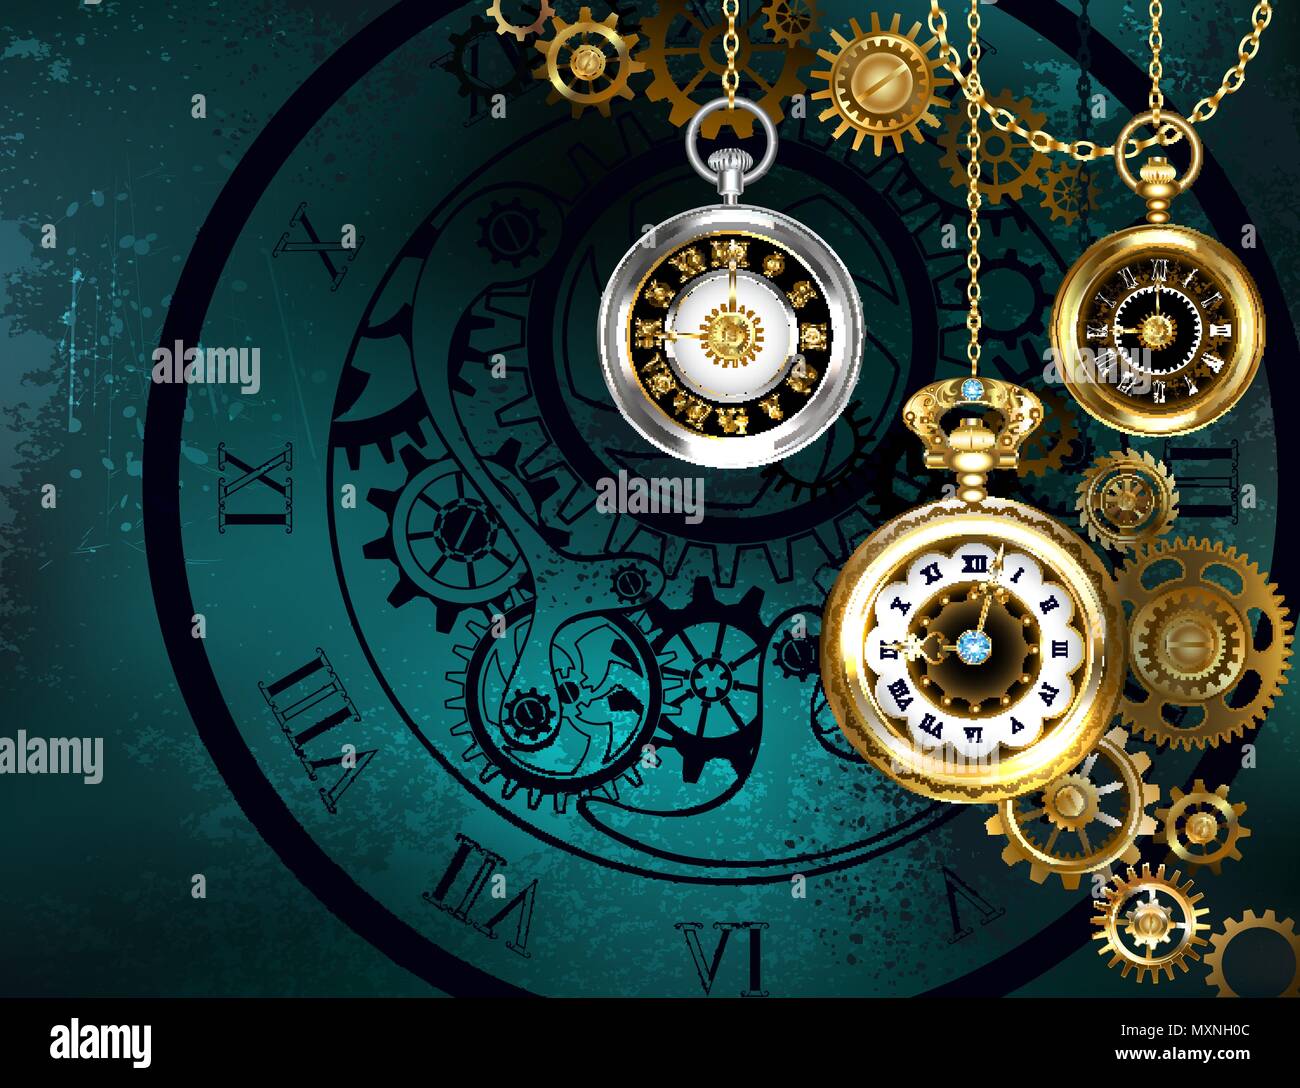 Jewelery, antique clock with gold chains on green textured background. Stock Vector